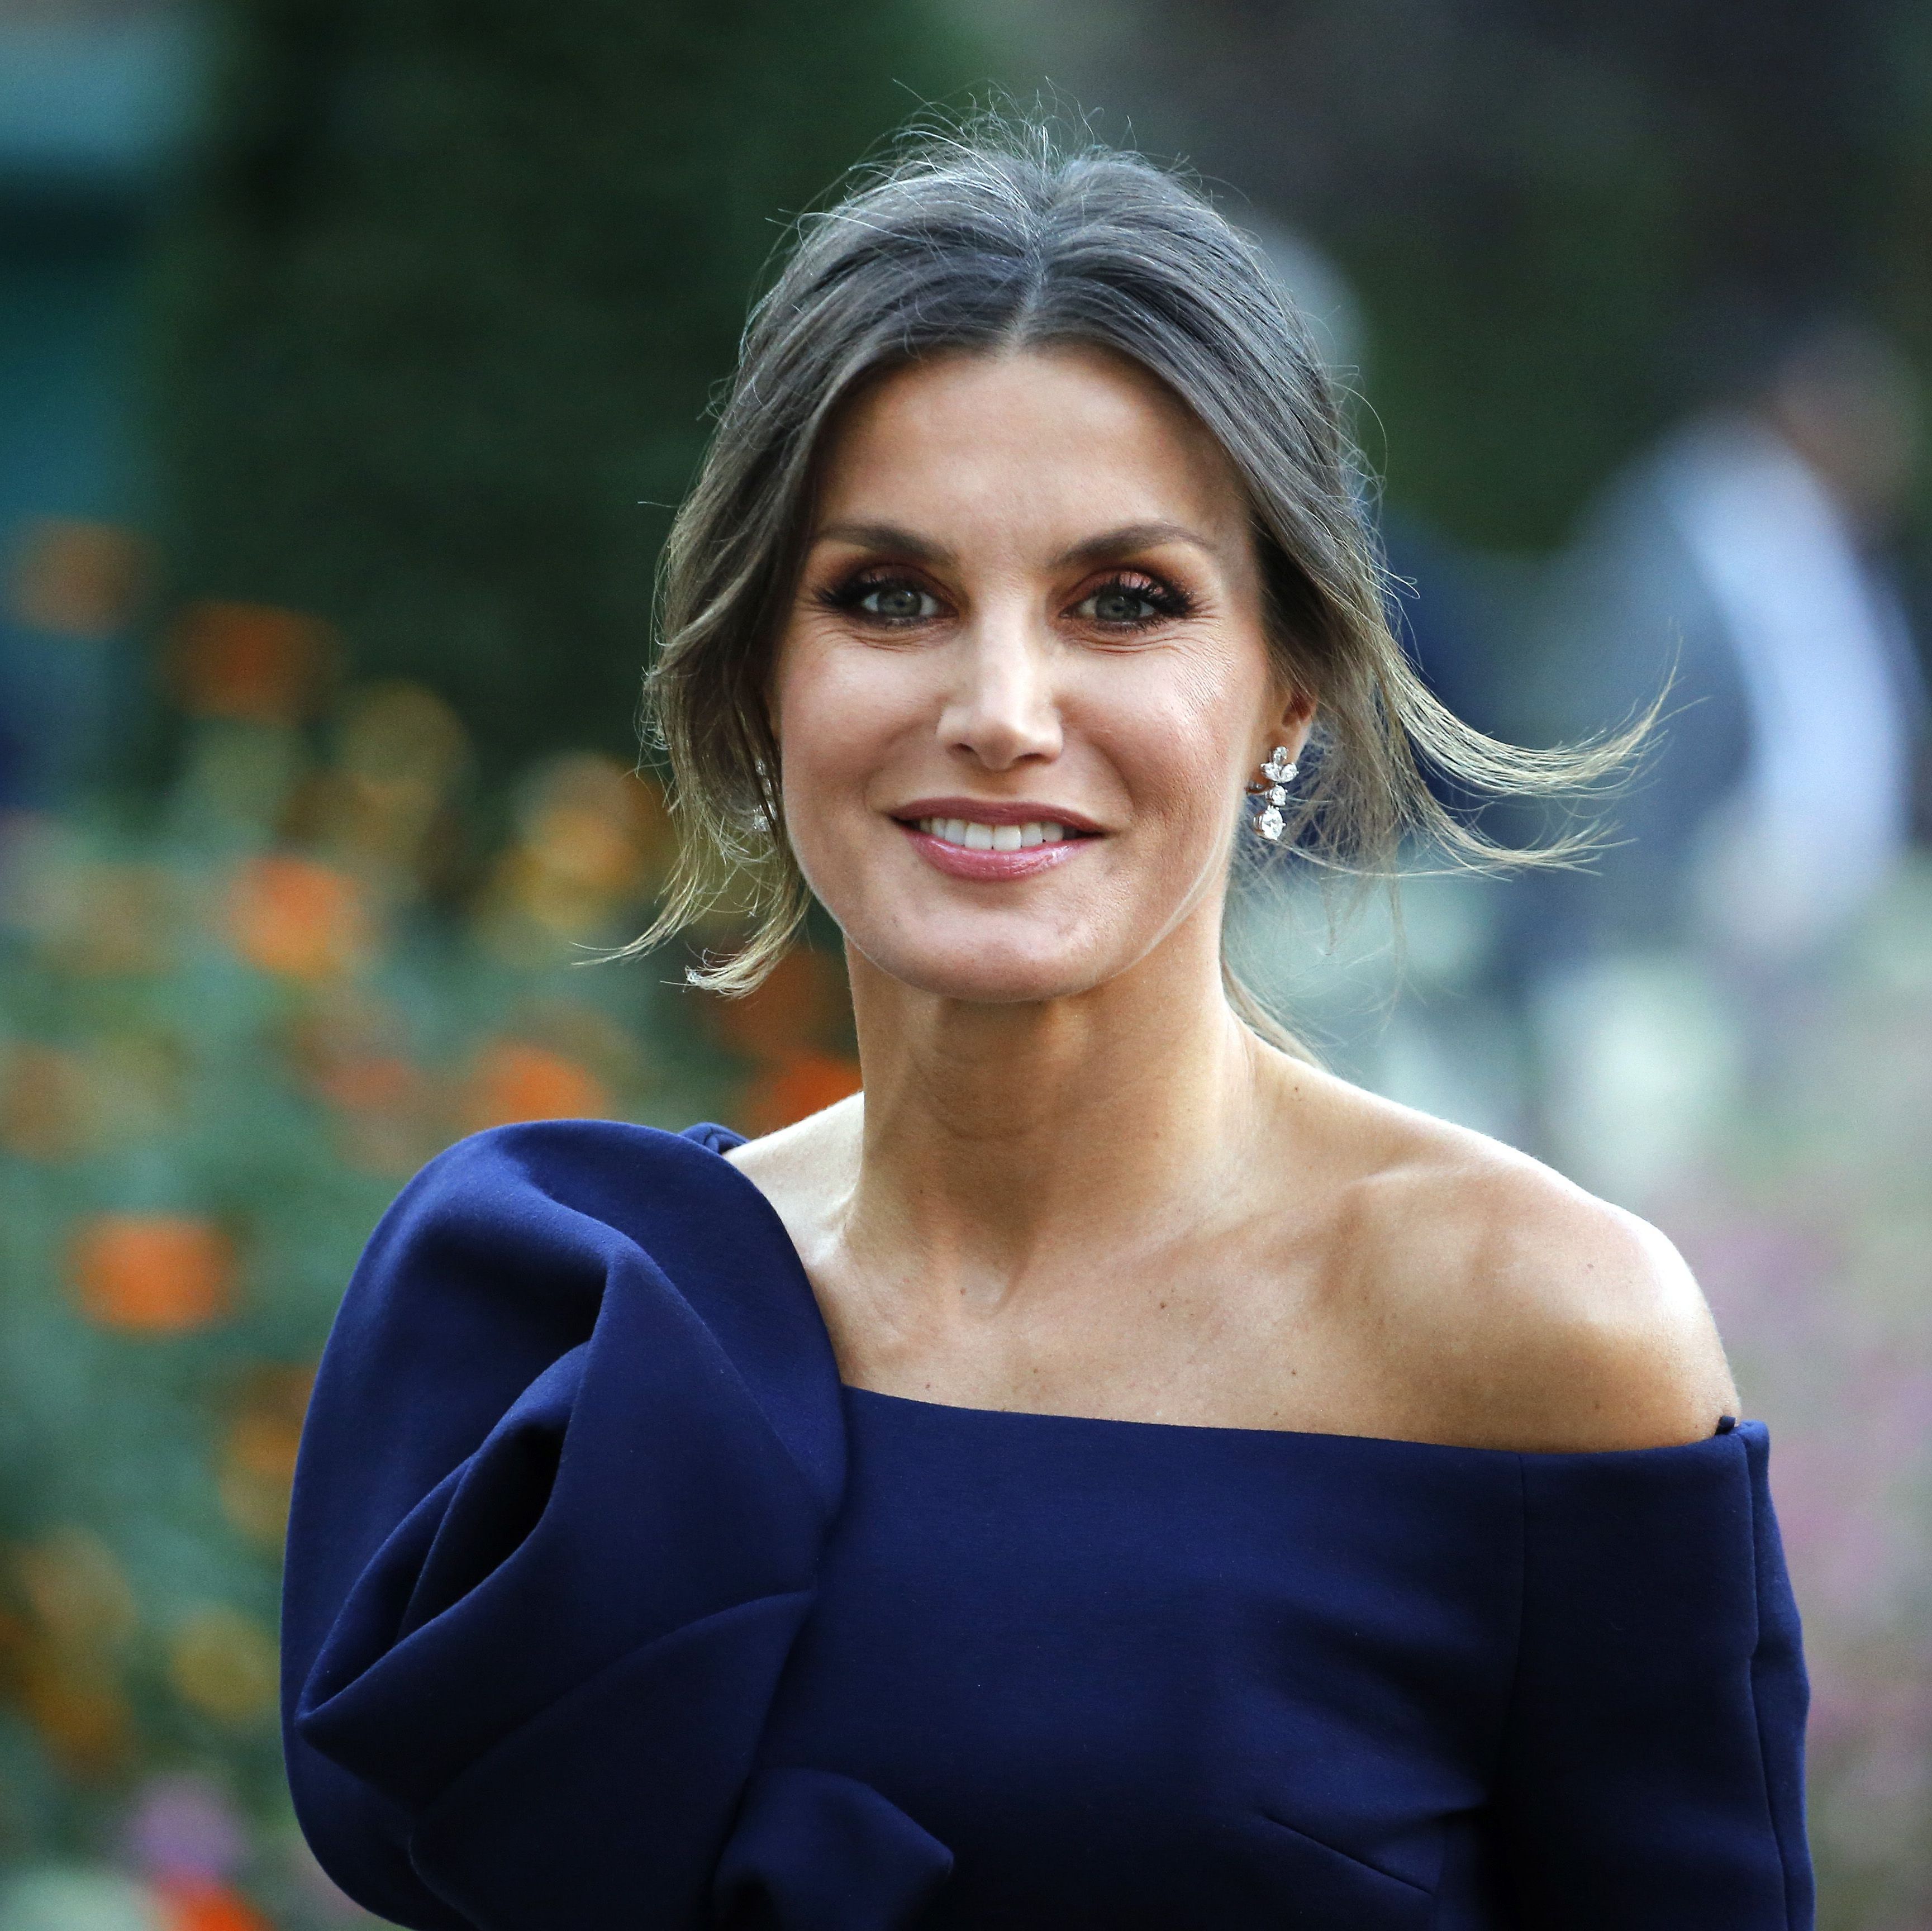 Leather Leggings Inspired by Queen Letizia of Spain's Royal Style